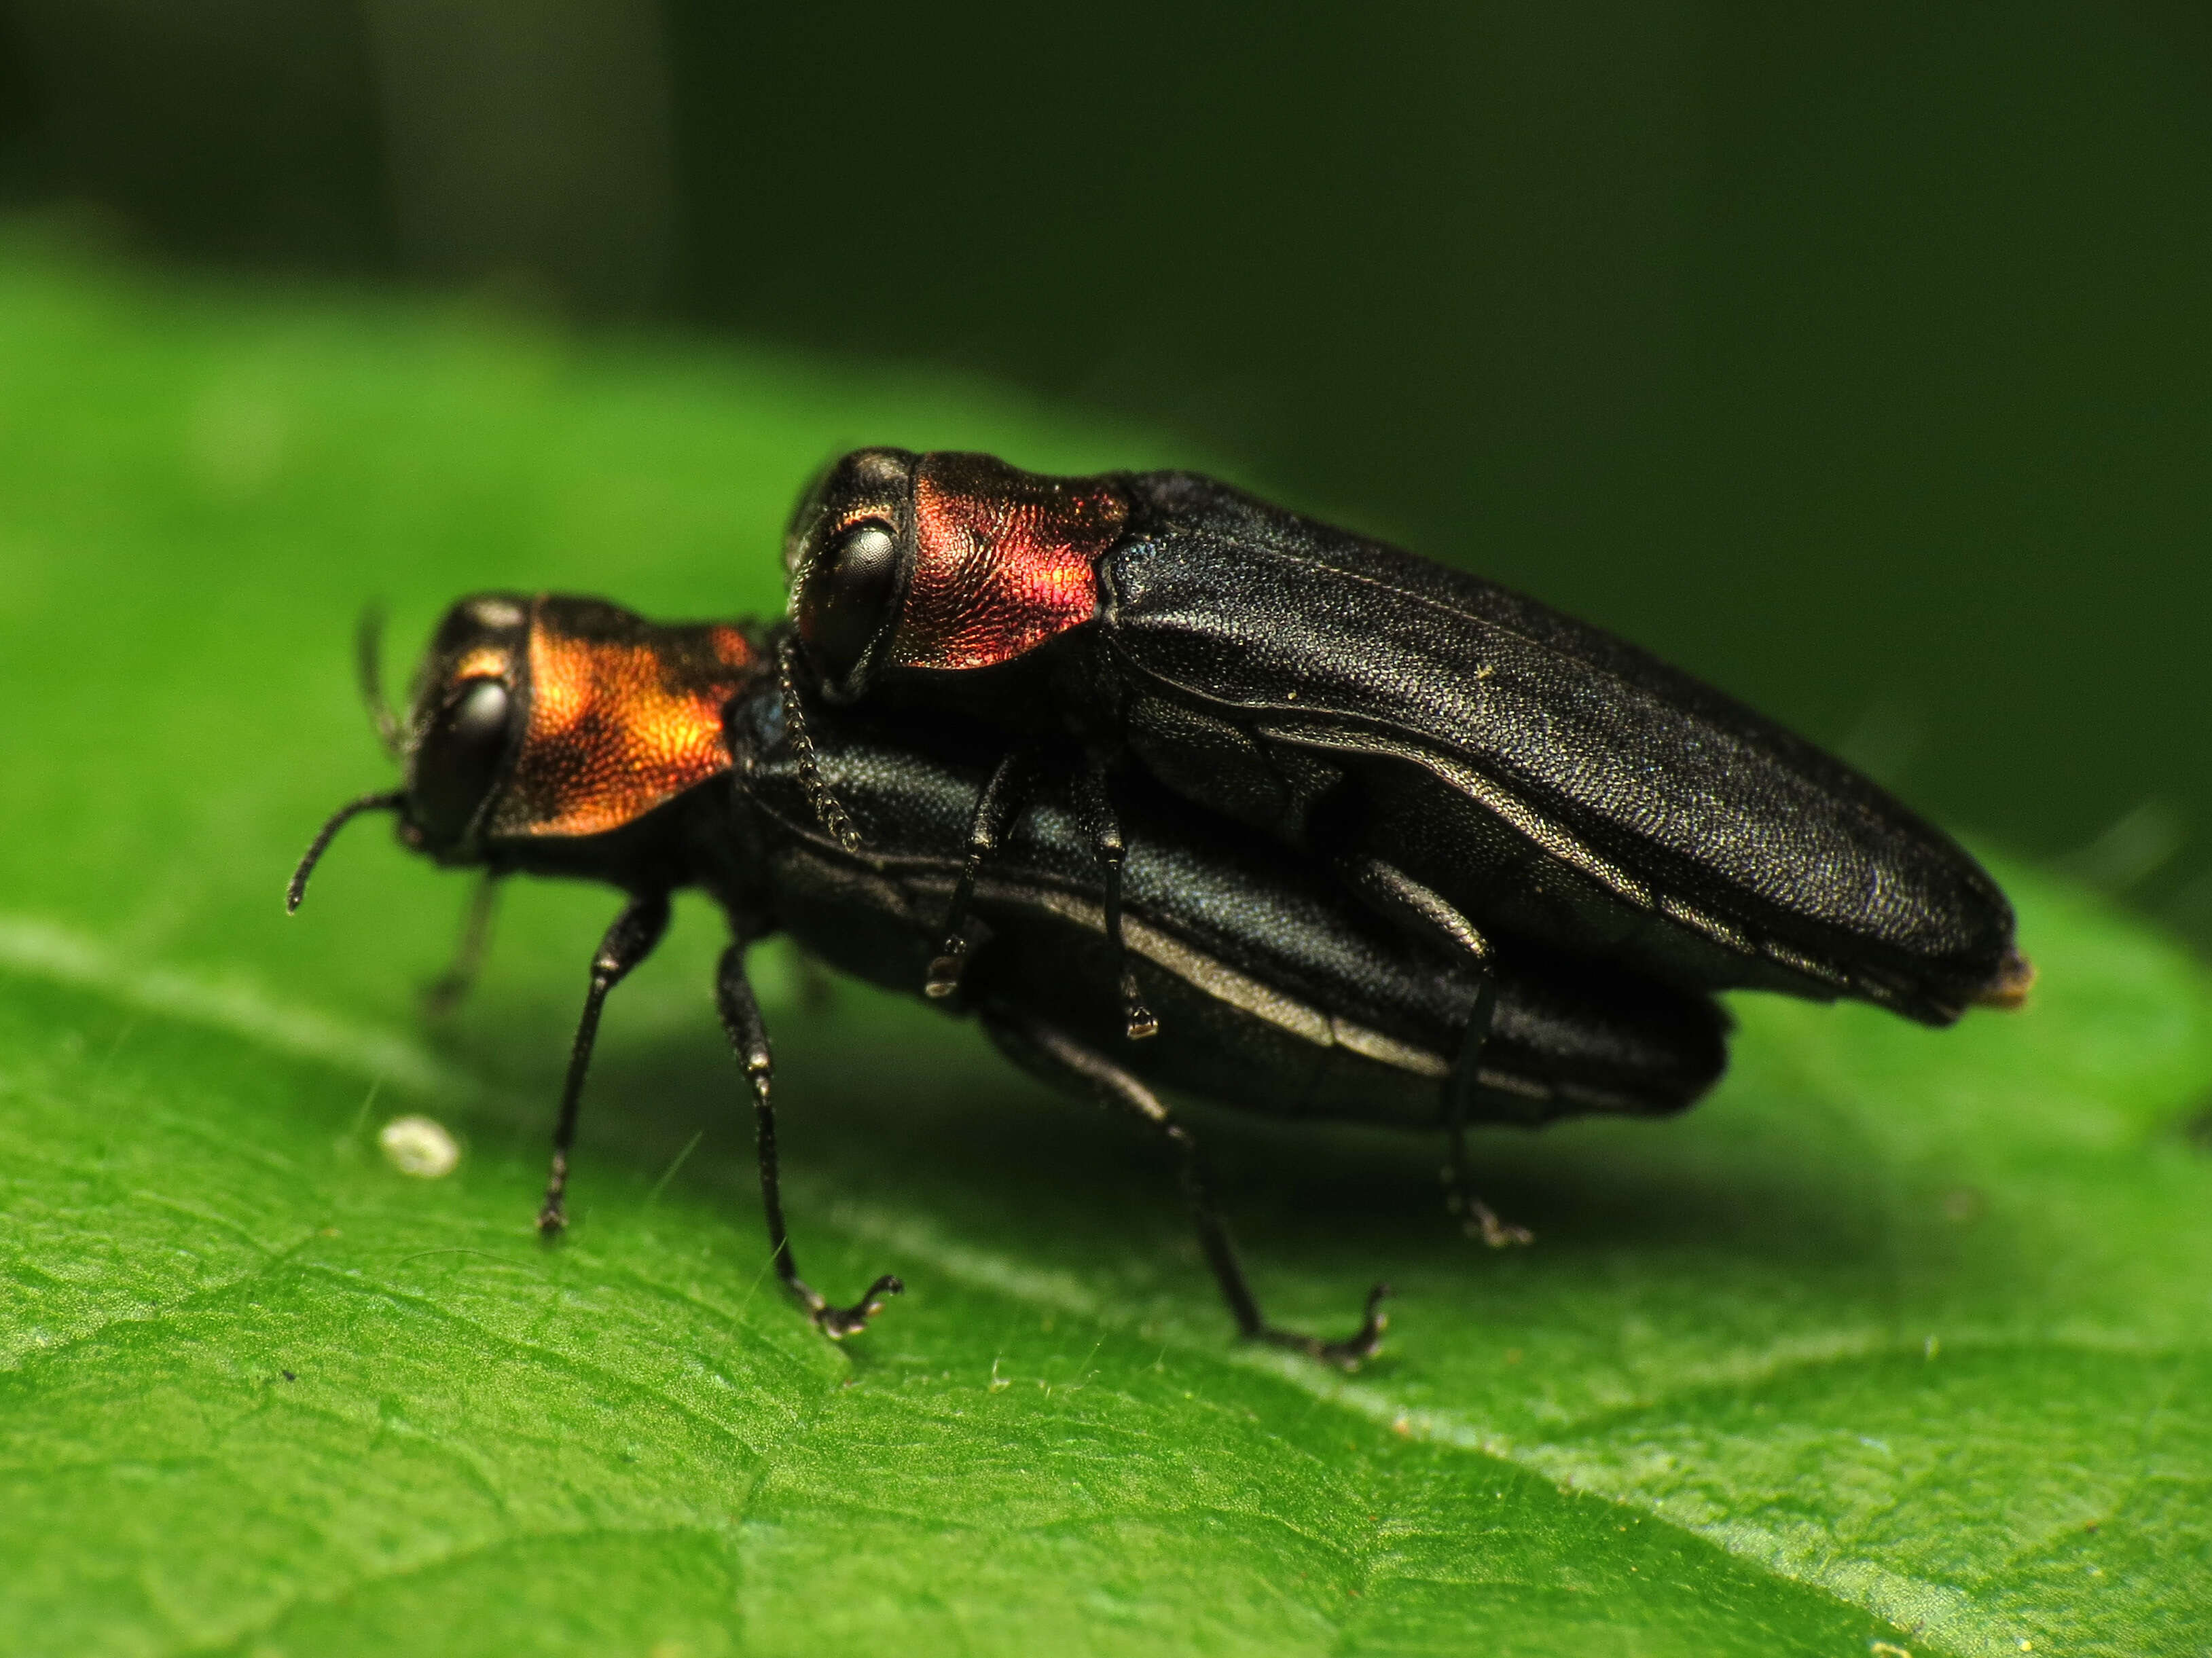 Image of Red-necked Cane Borer